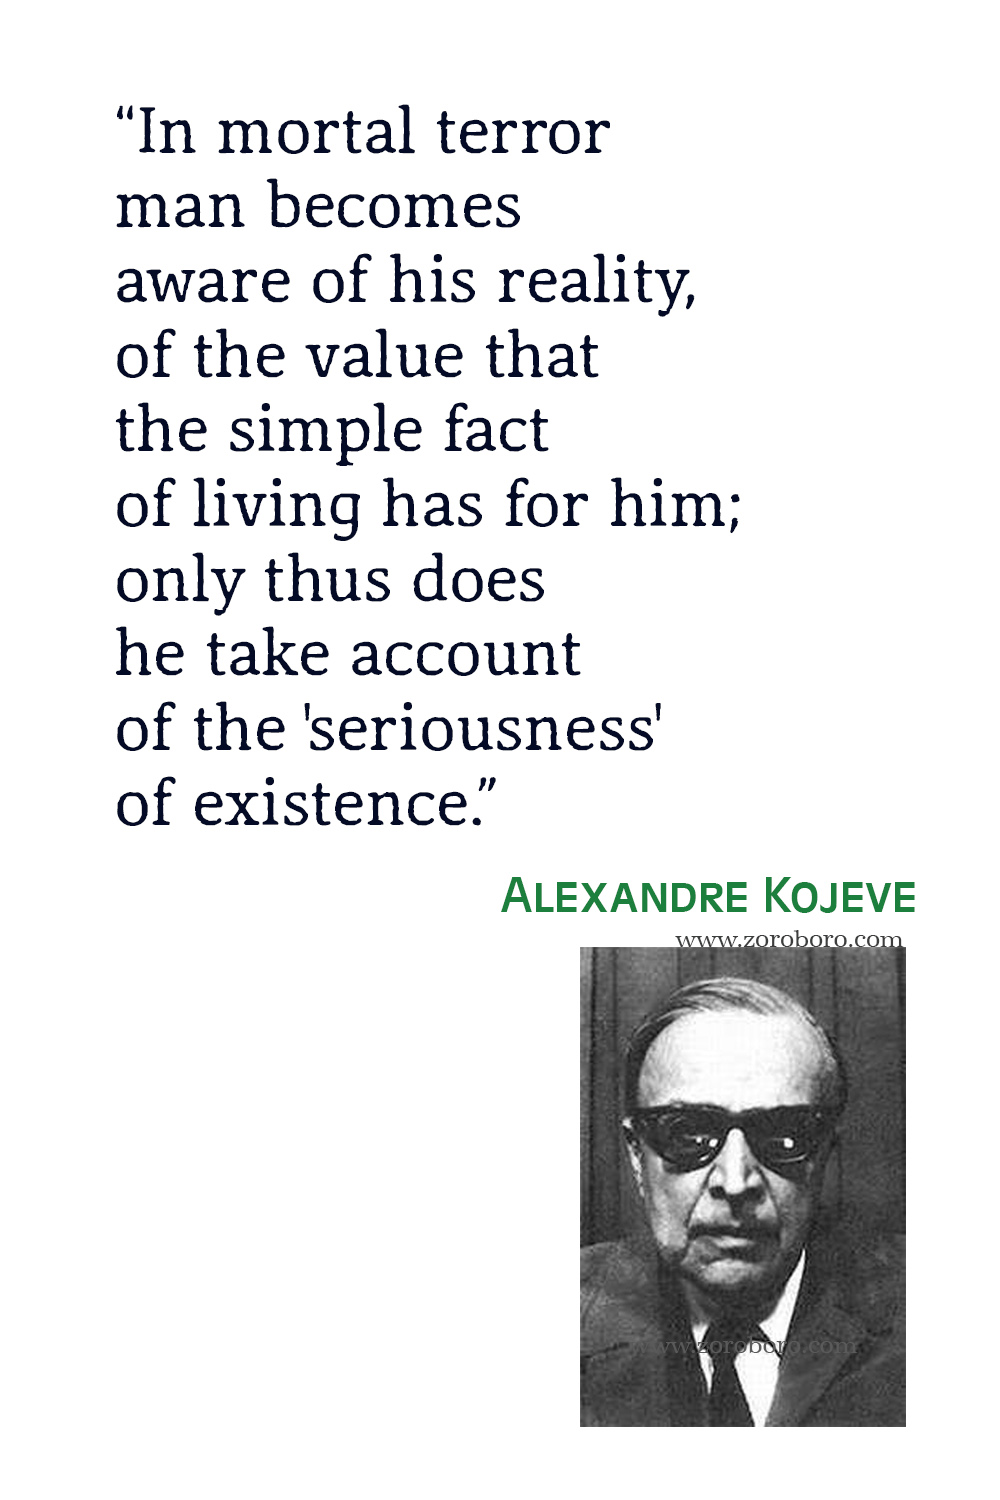 Alexandre Kojeve Quotes, Alexandre Kojeve Books, Introduction to the Reading of Hegel Book by Alexandre Kojève, Alexandre Kojeve .